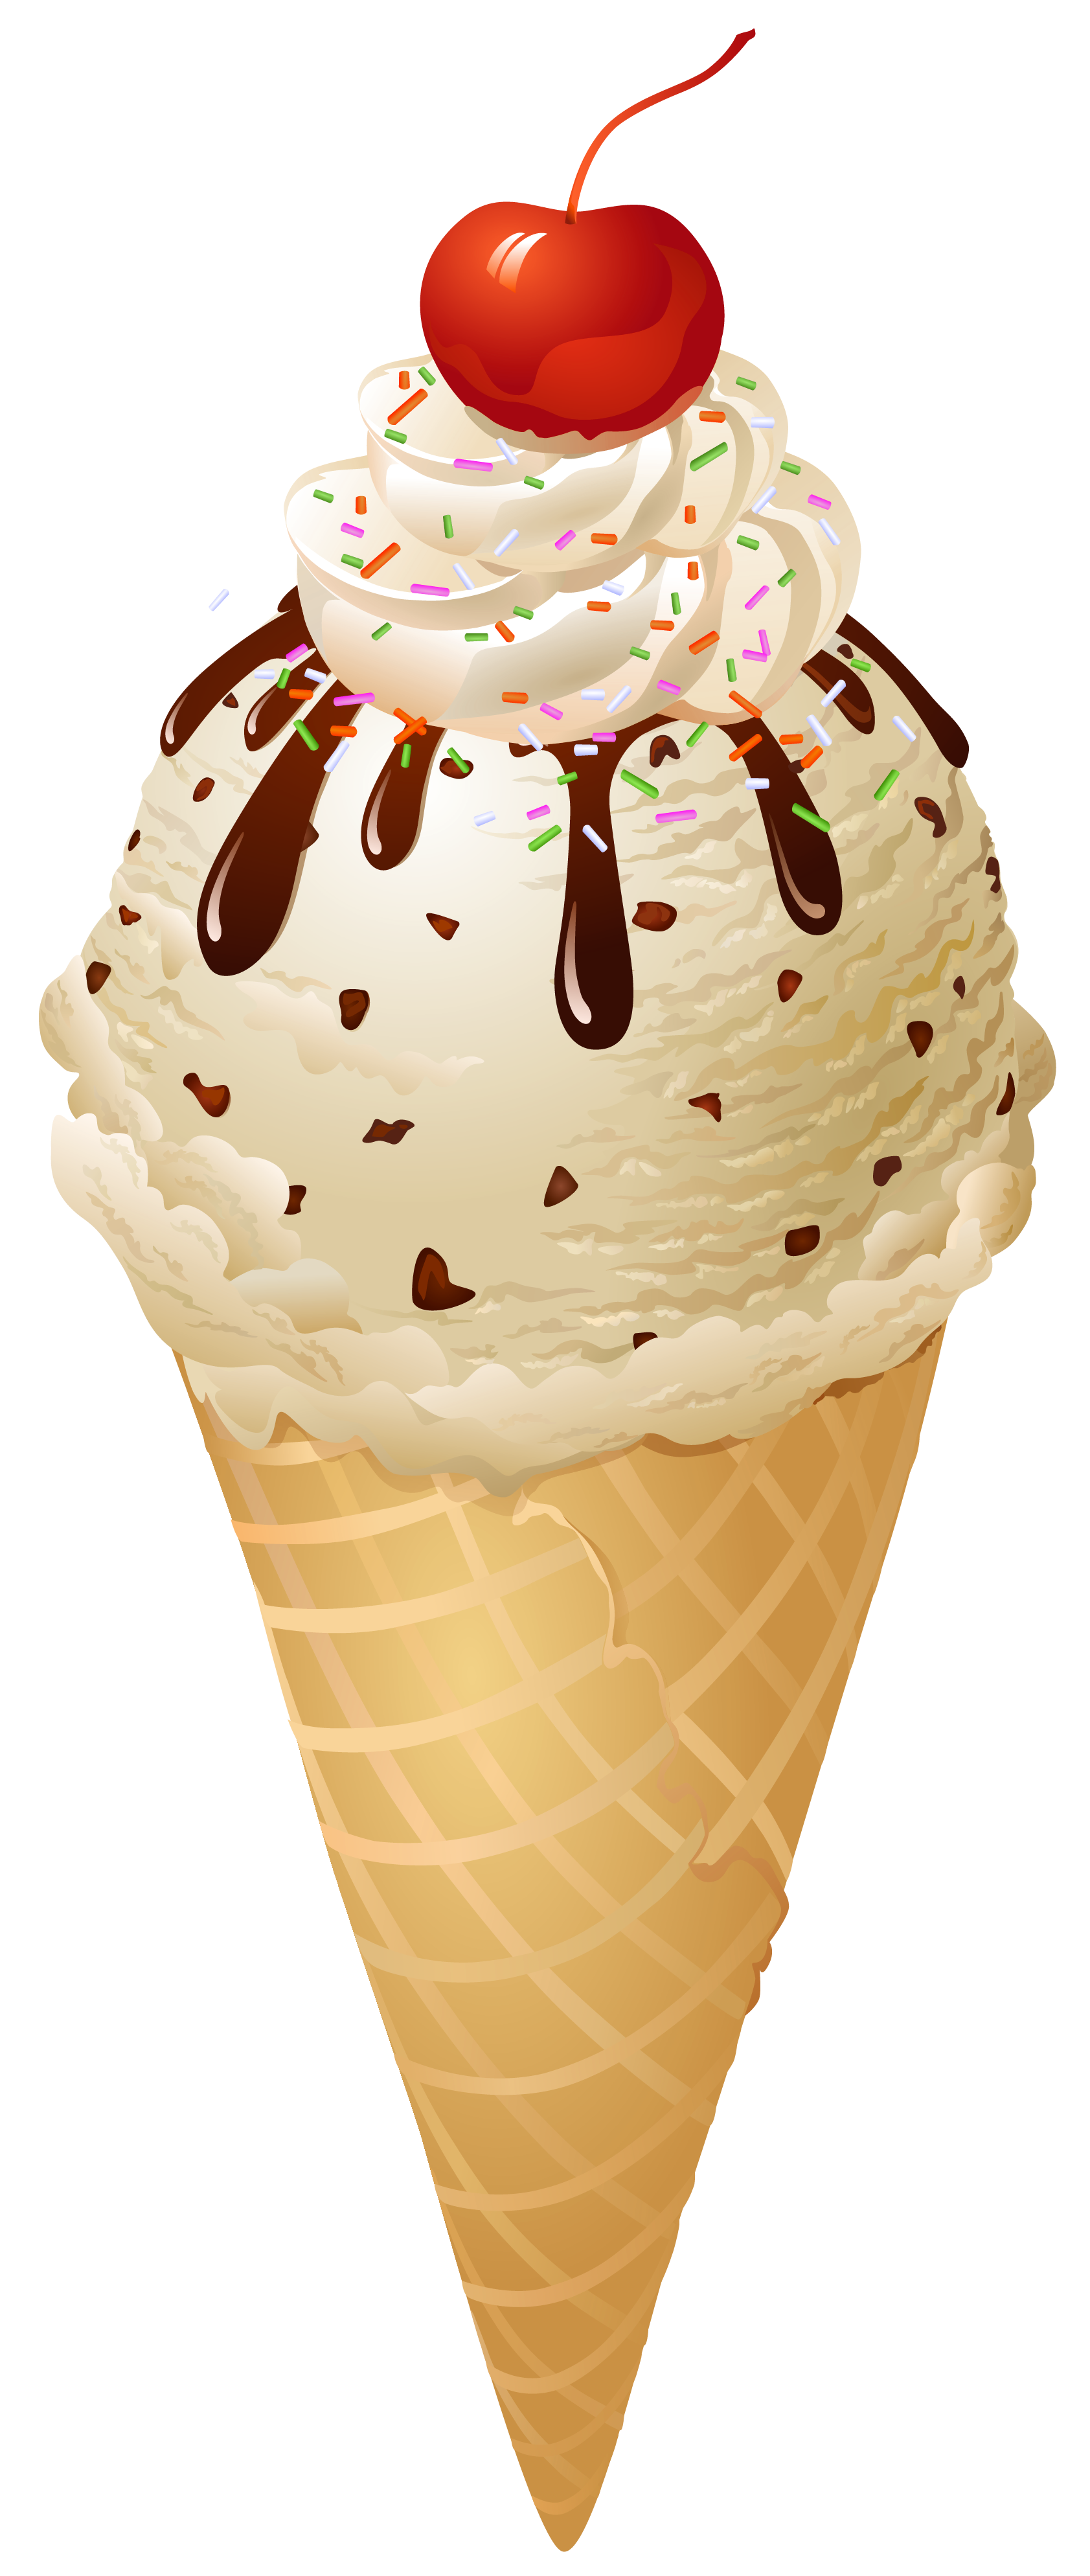 Download Ice Cream Cone Picture HQ PNG Image | FreePNGImg